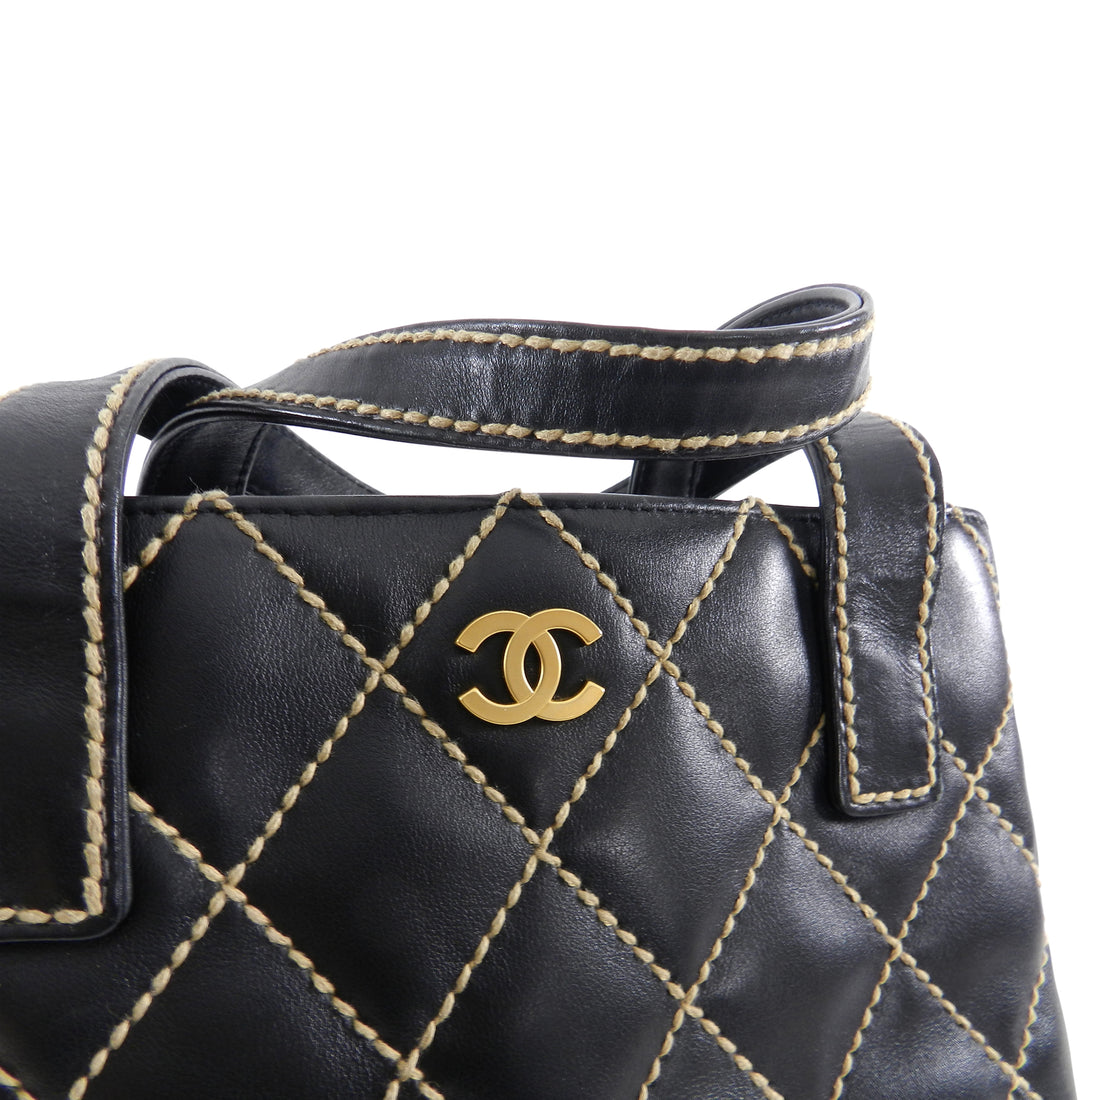 Chanel Wild Stitch Black Calfskin Leather Quilt Small Tote Bag – I